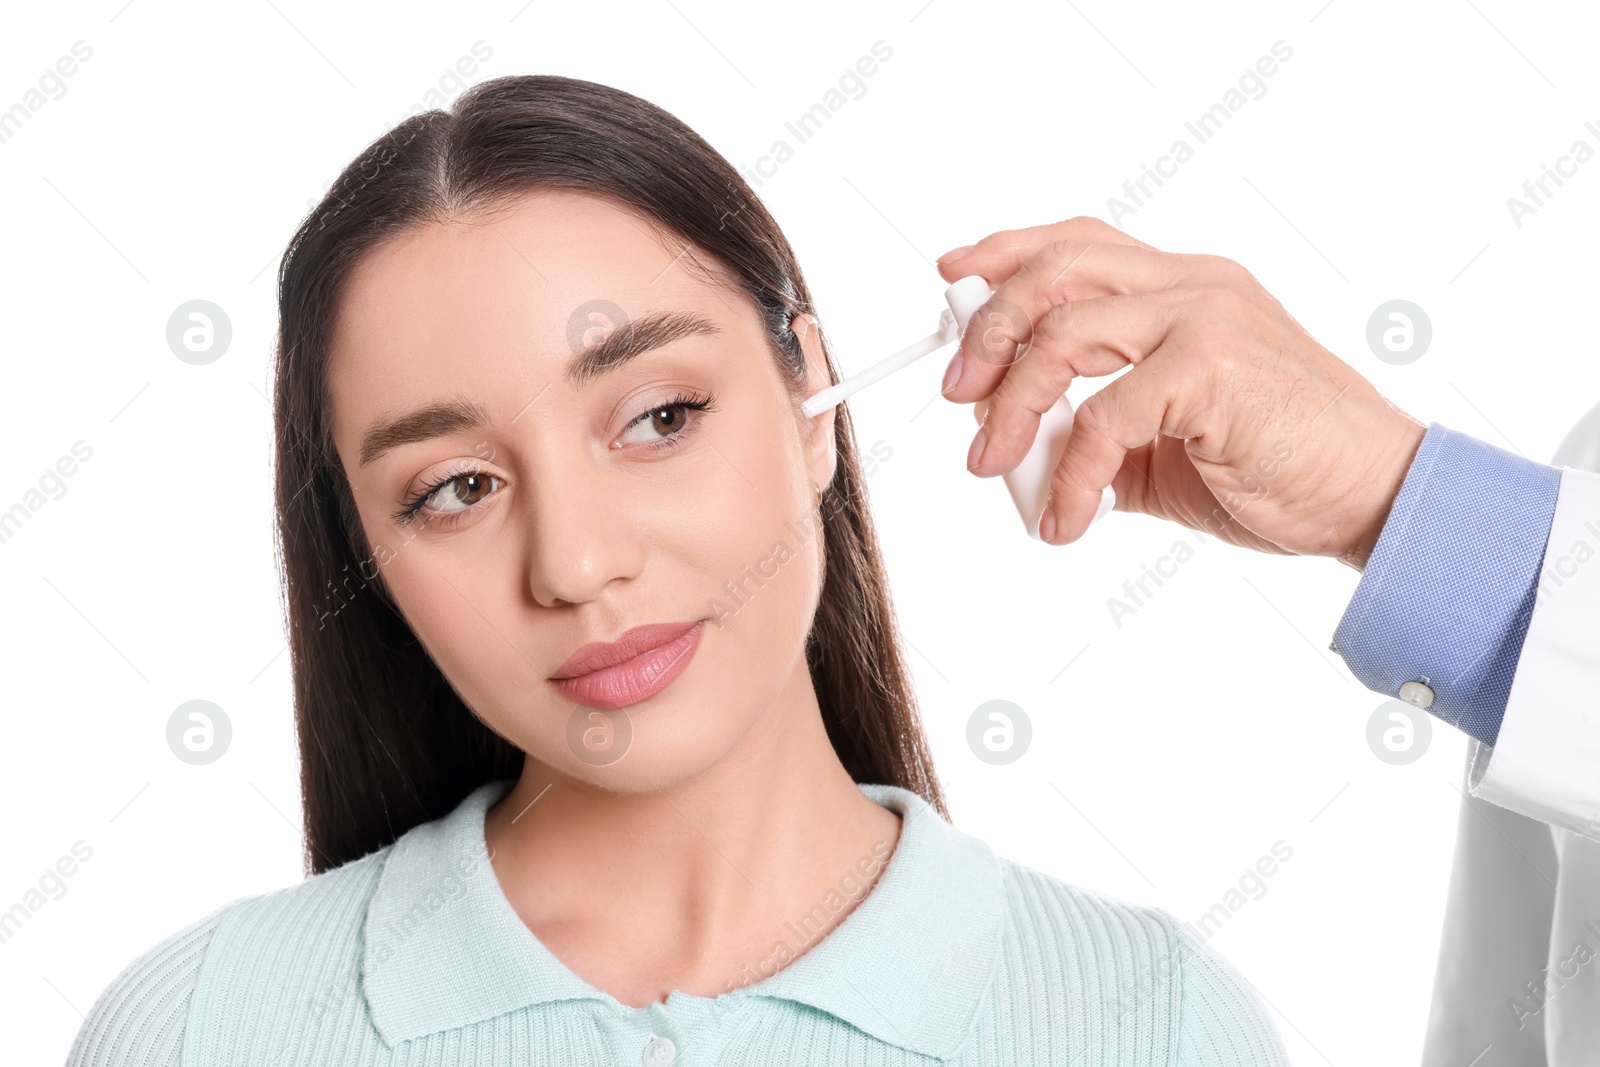 Photo of Doctor spraying medication into woman's ear on white background